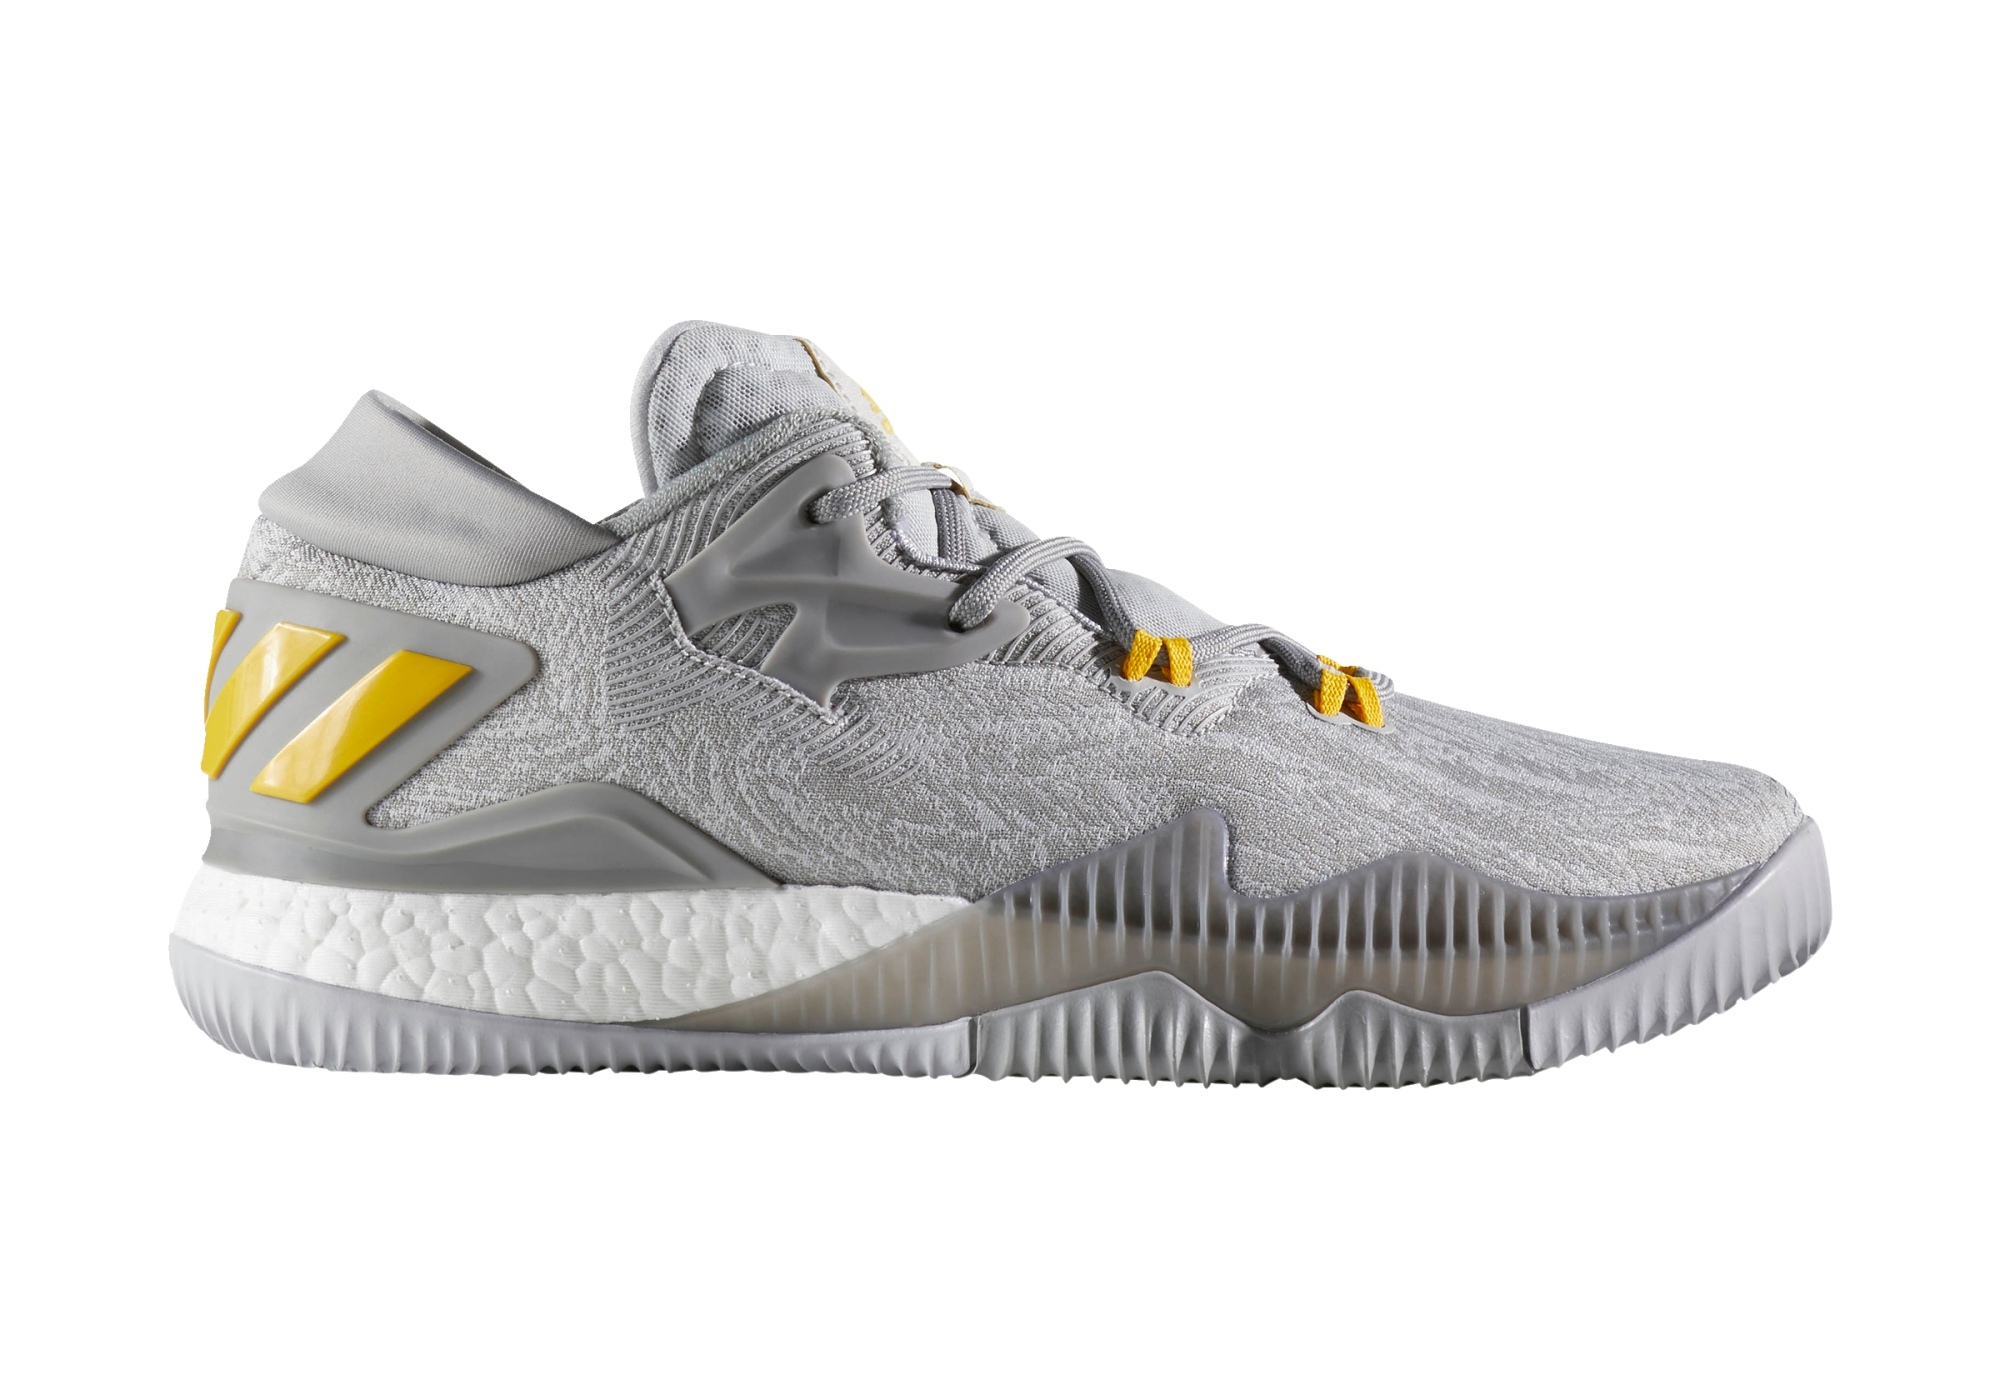 adidas crazylight boost low 2016